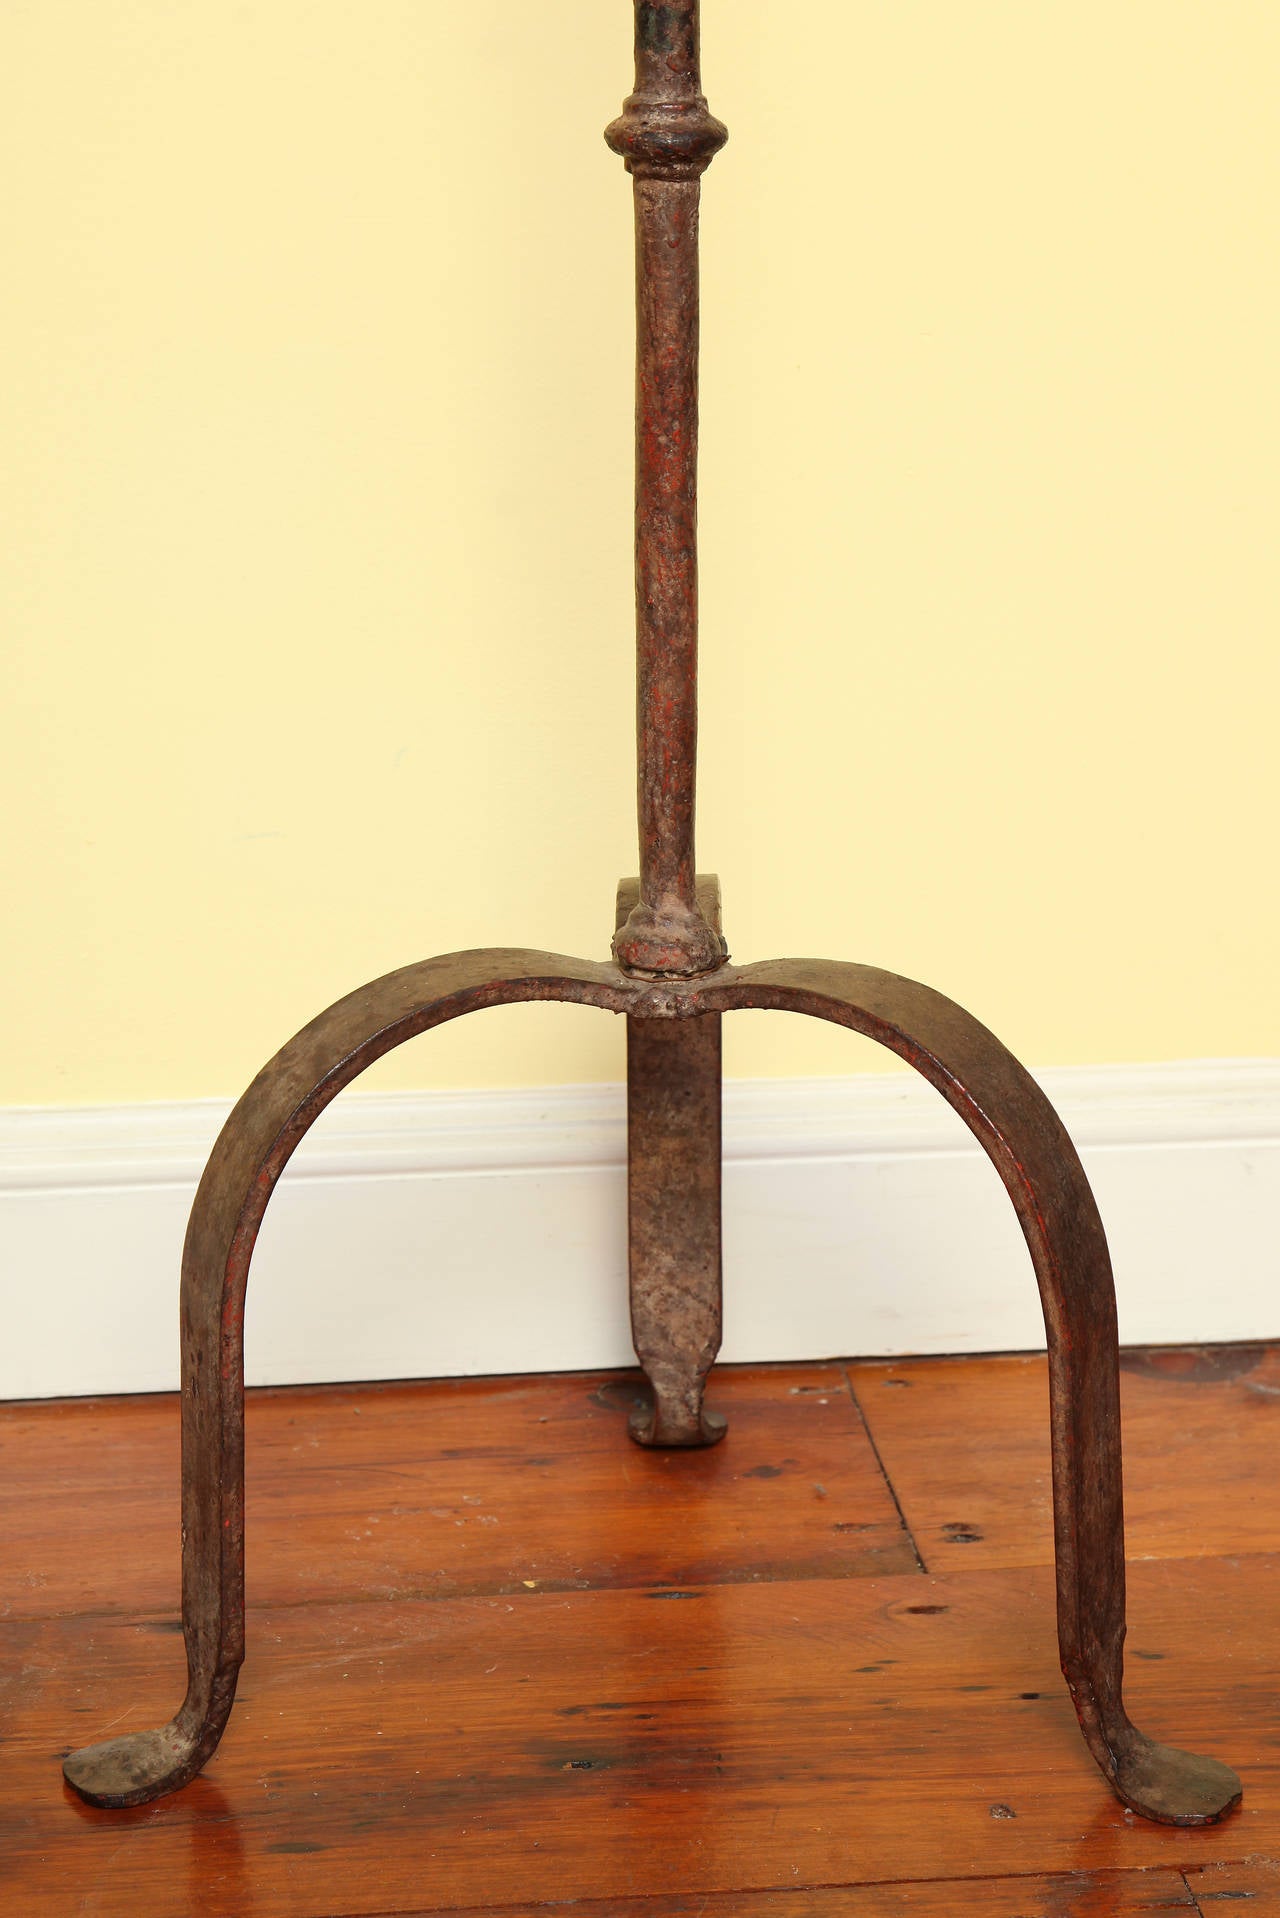 Hand-Crafted Baroque Wrought Iron Torchiere Mounted as a Floor Lamp, circa 1690